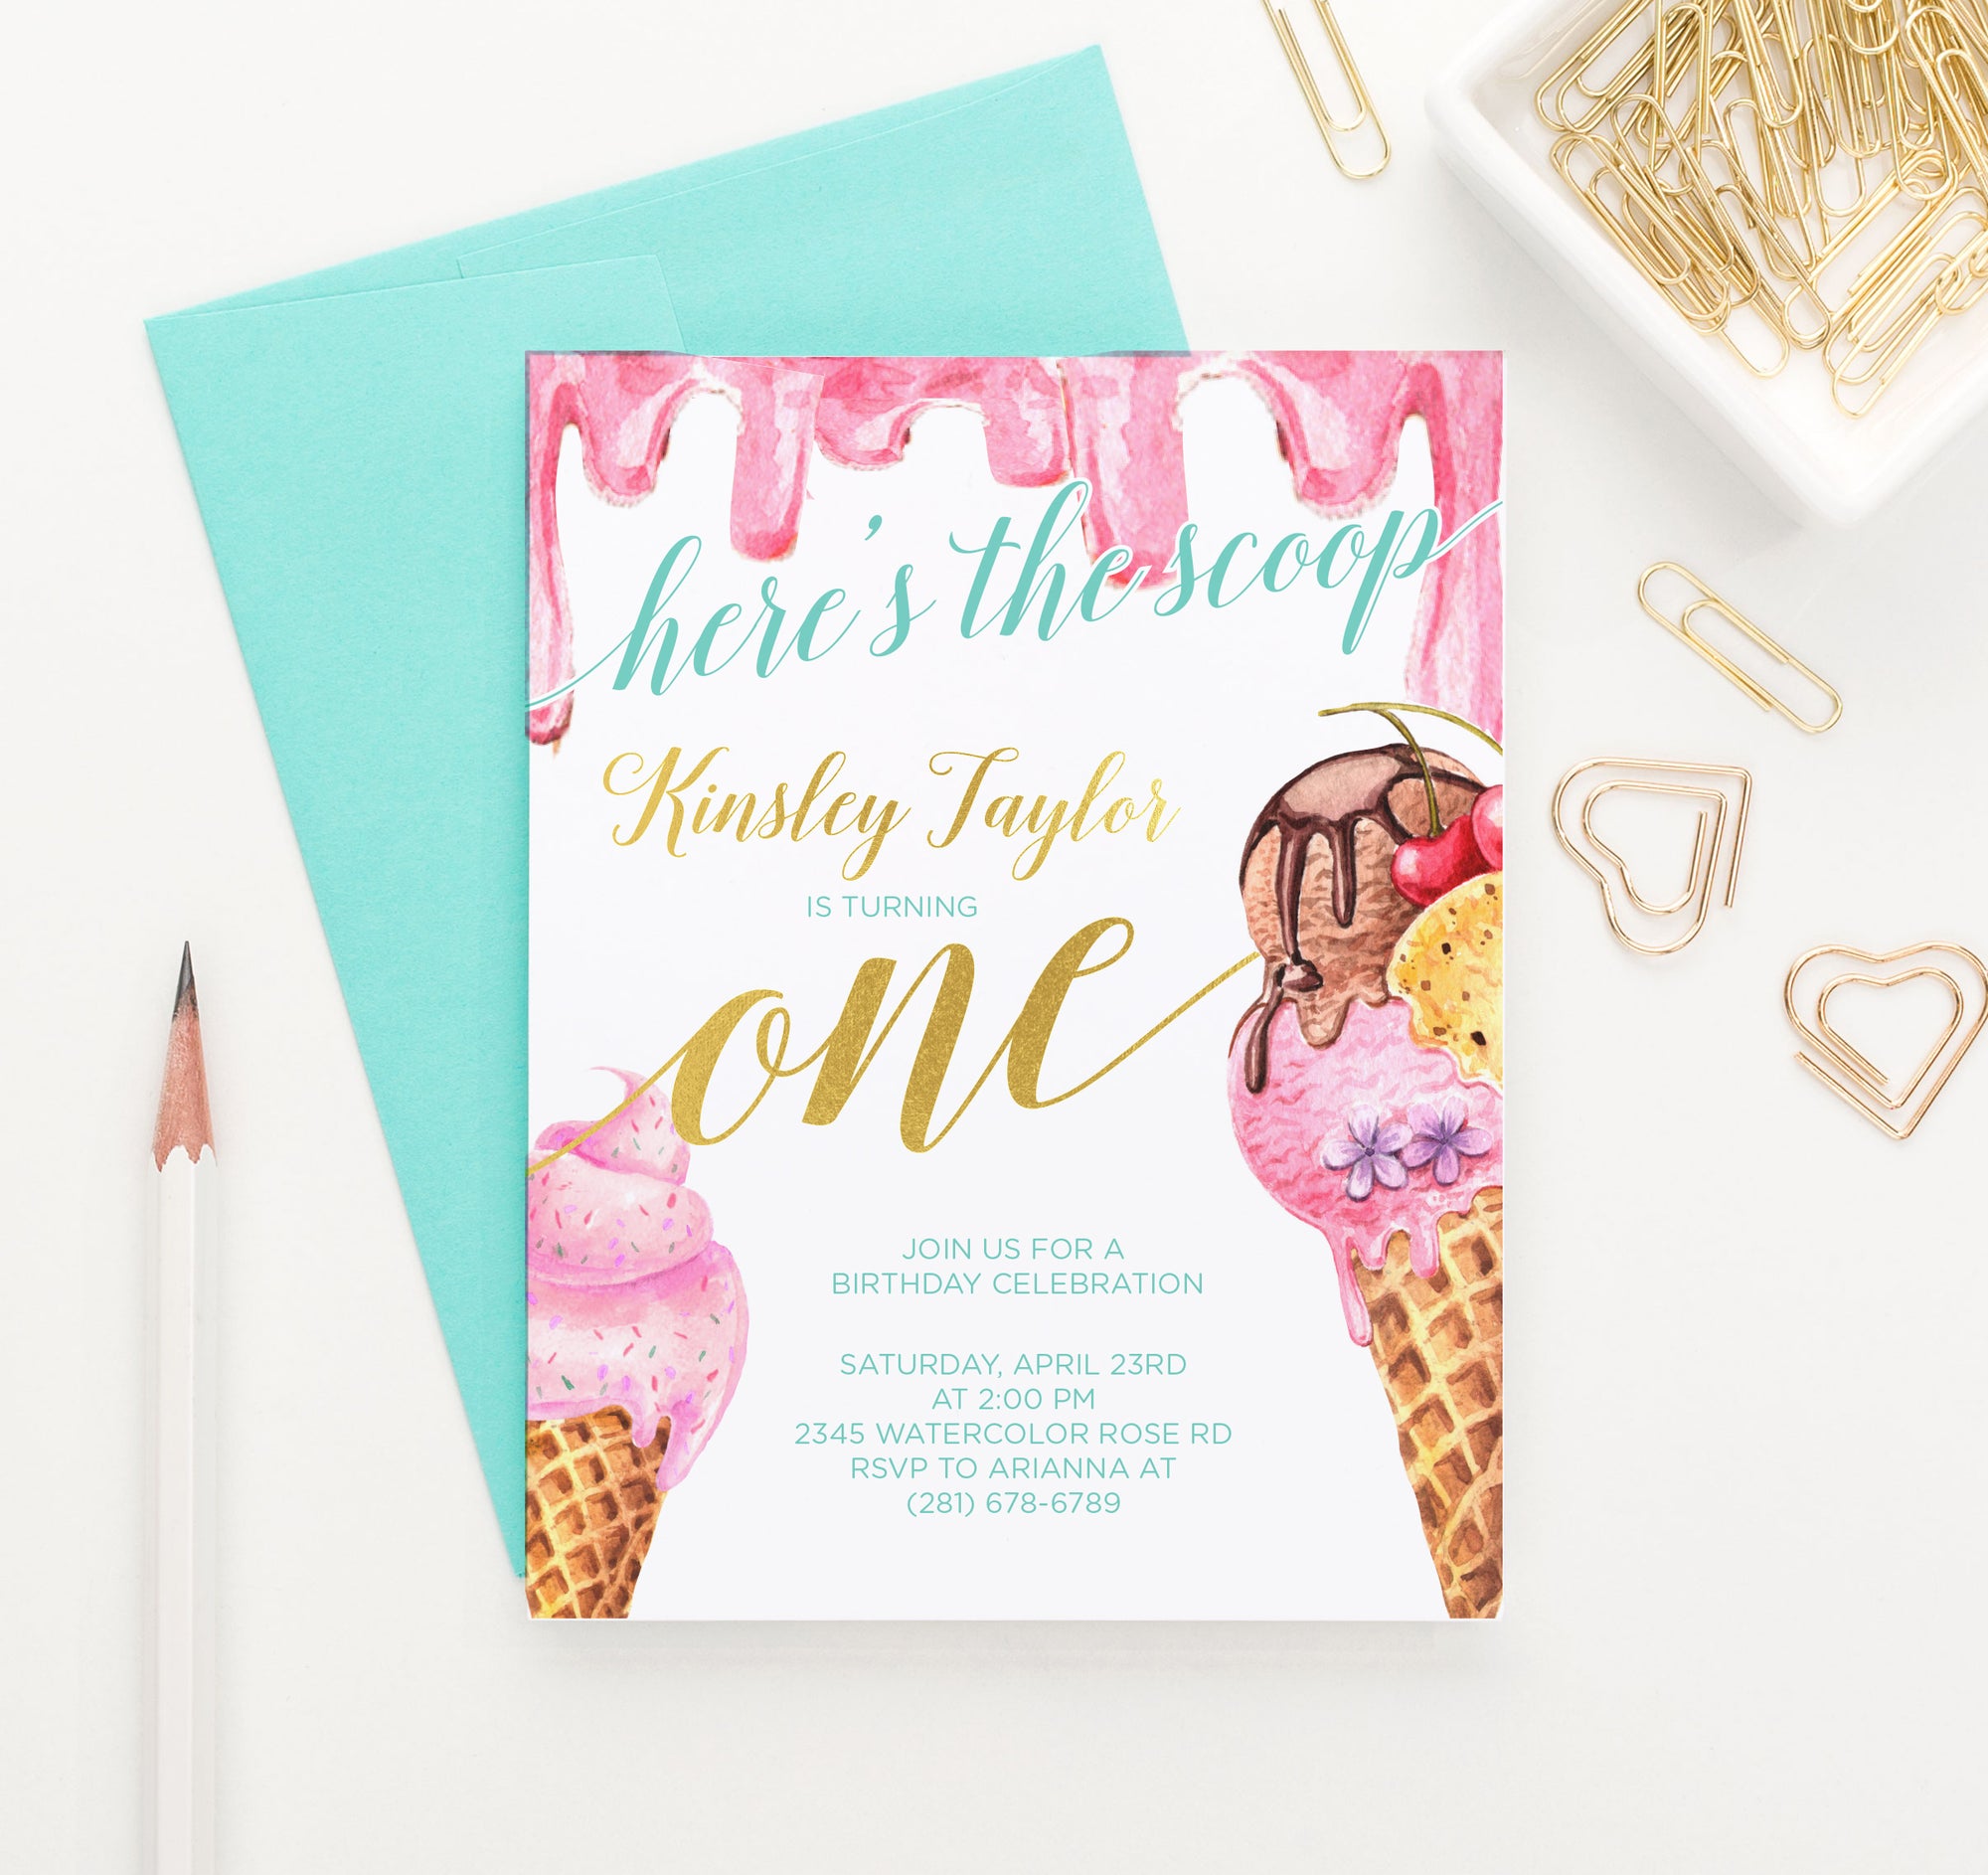 Here's The Scoop Gold Birthday Party Invitations With Ice Cream